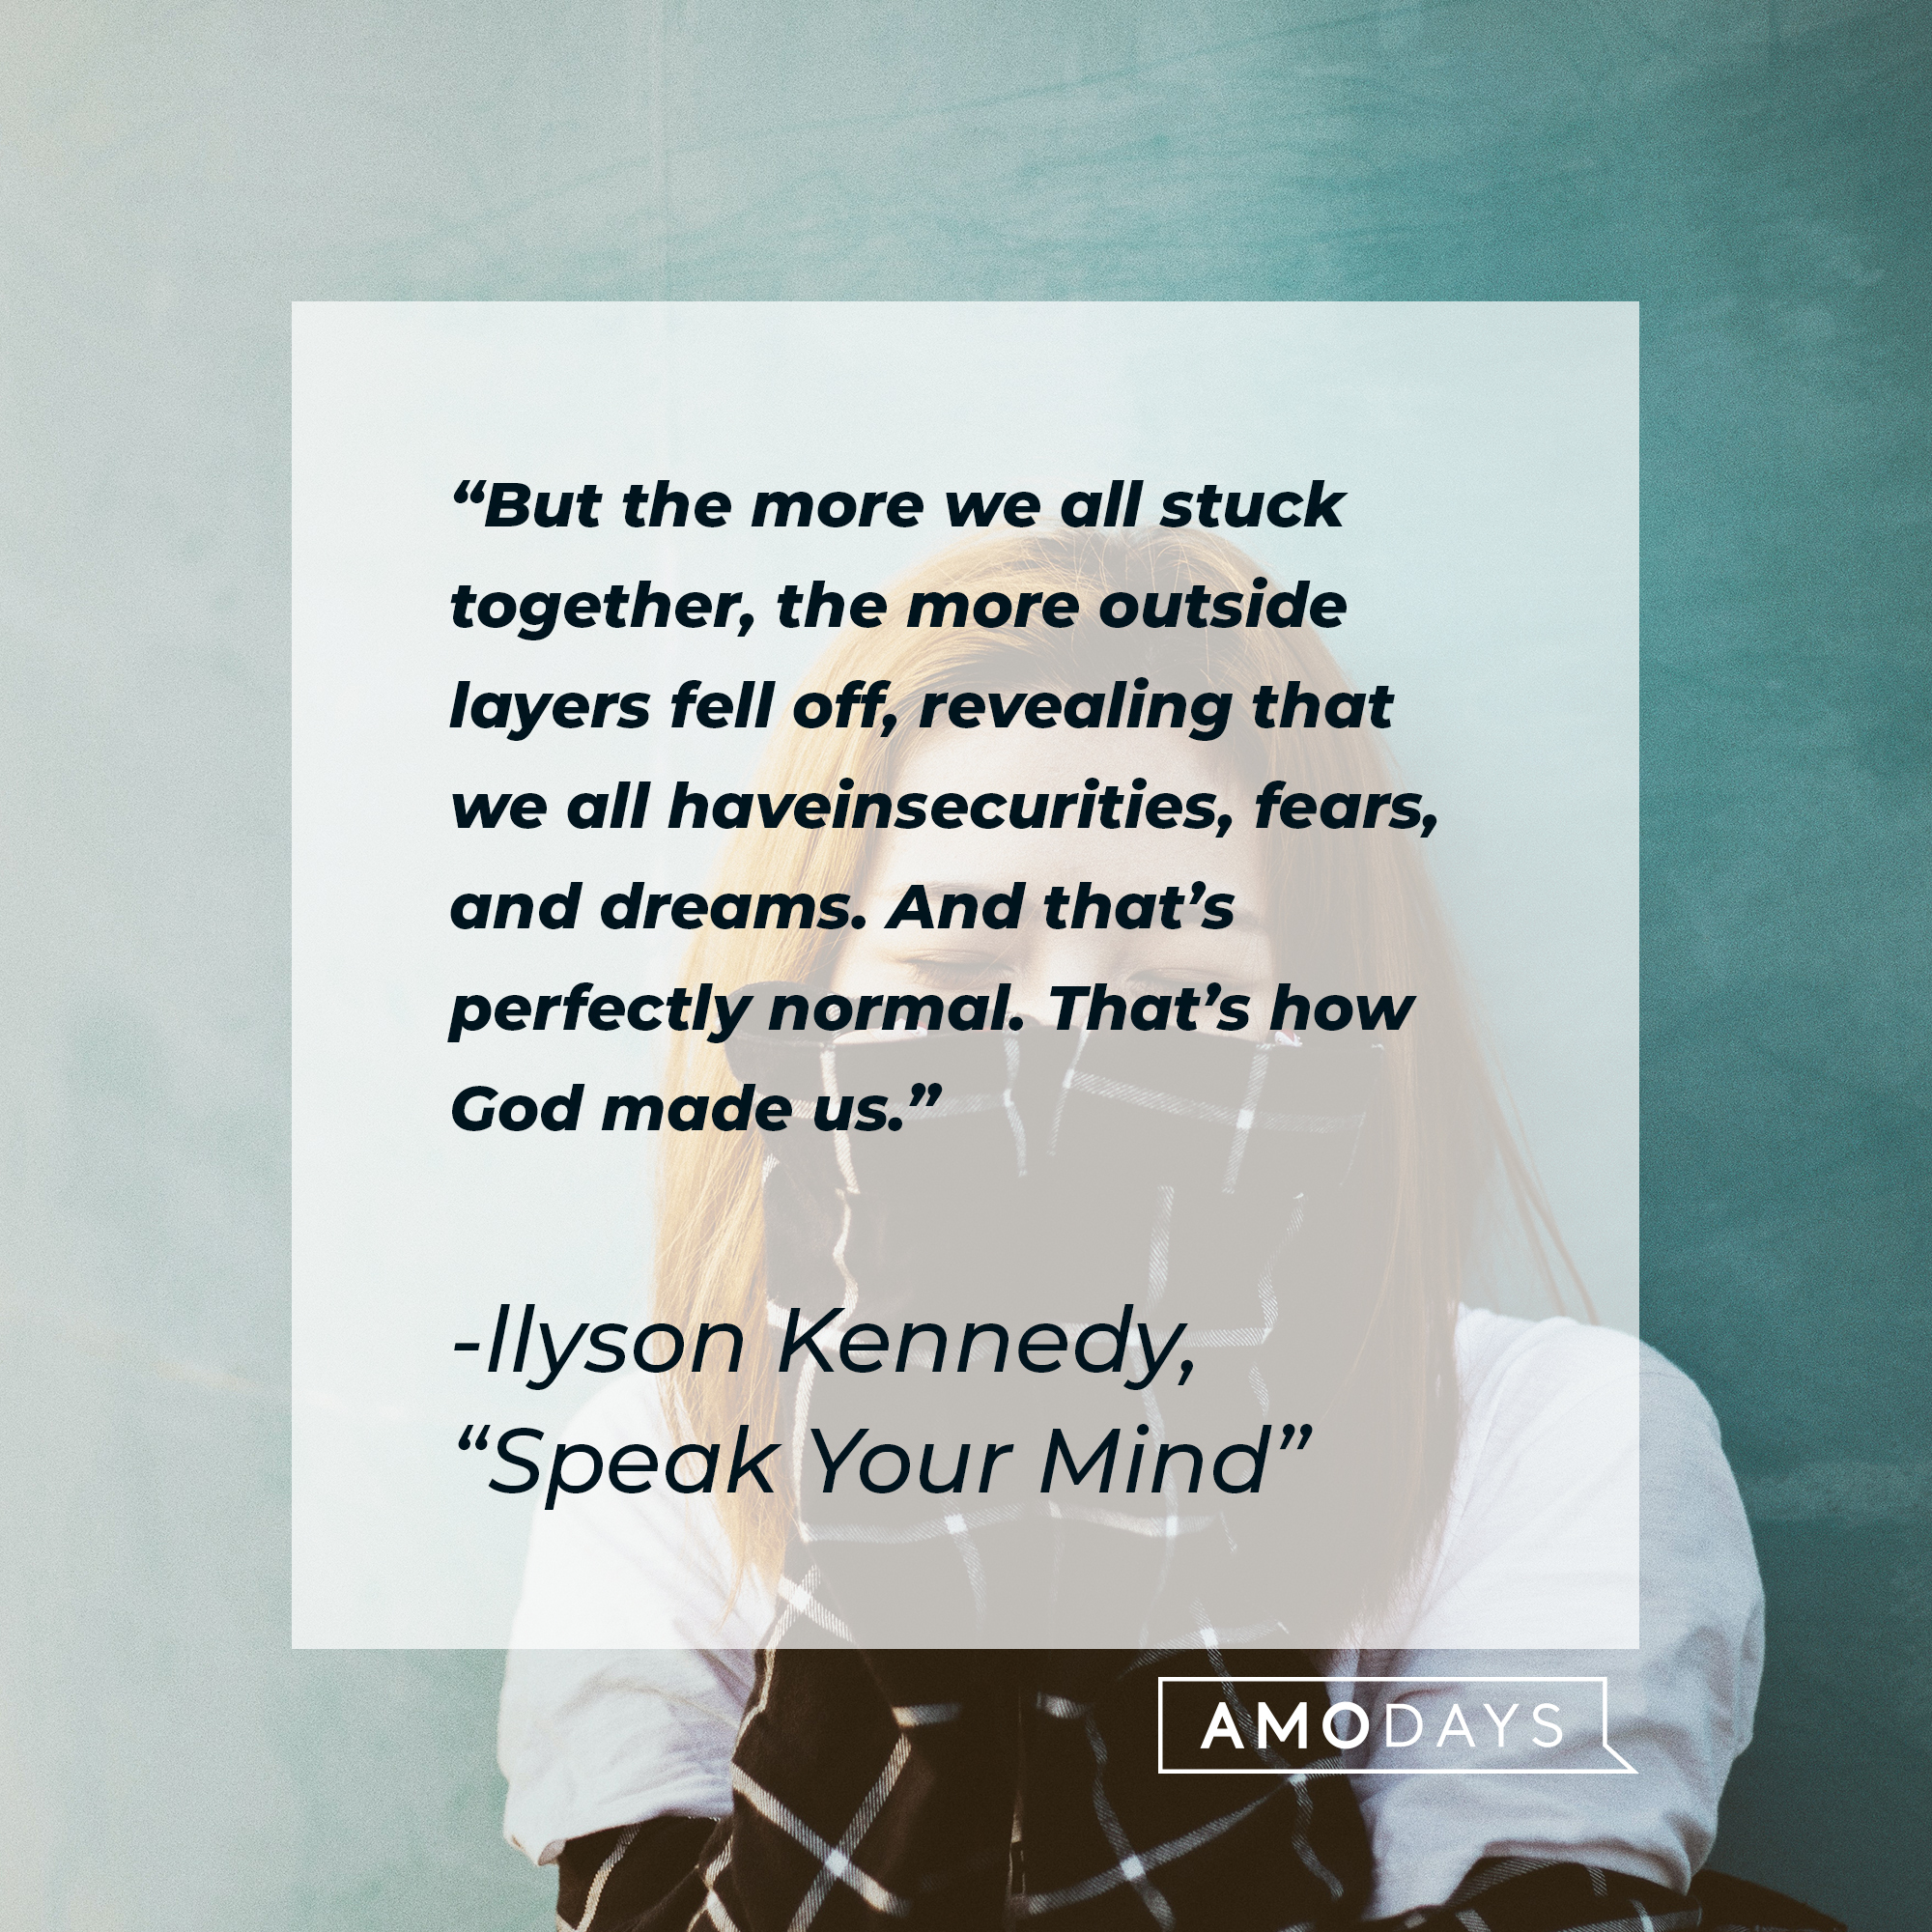 llyson Kennedy's quote: “But the more we all stuck together, the more outside layers fell off, revealing that we all have insecurities, fears, and dreams. And that’s perfectly normal. That’s how God made us.” | Image: AmoDays